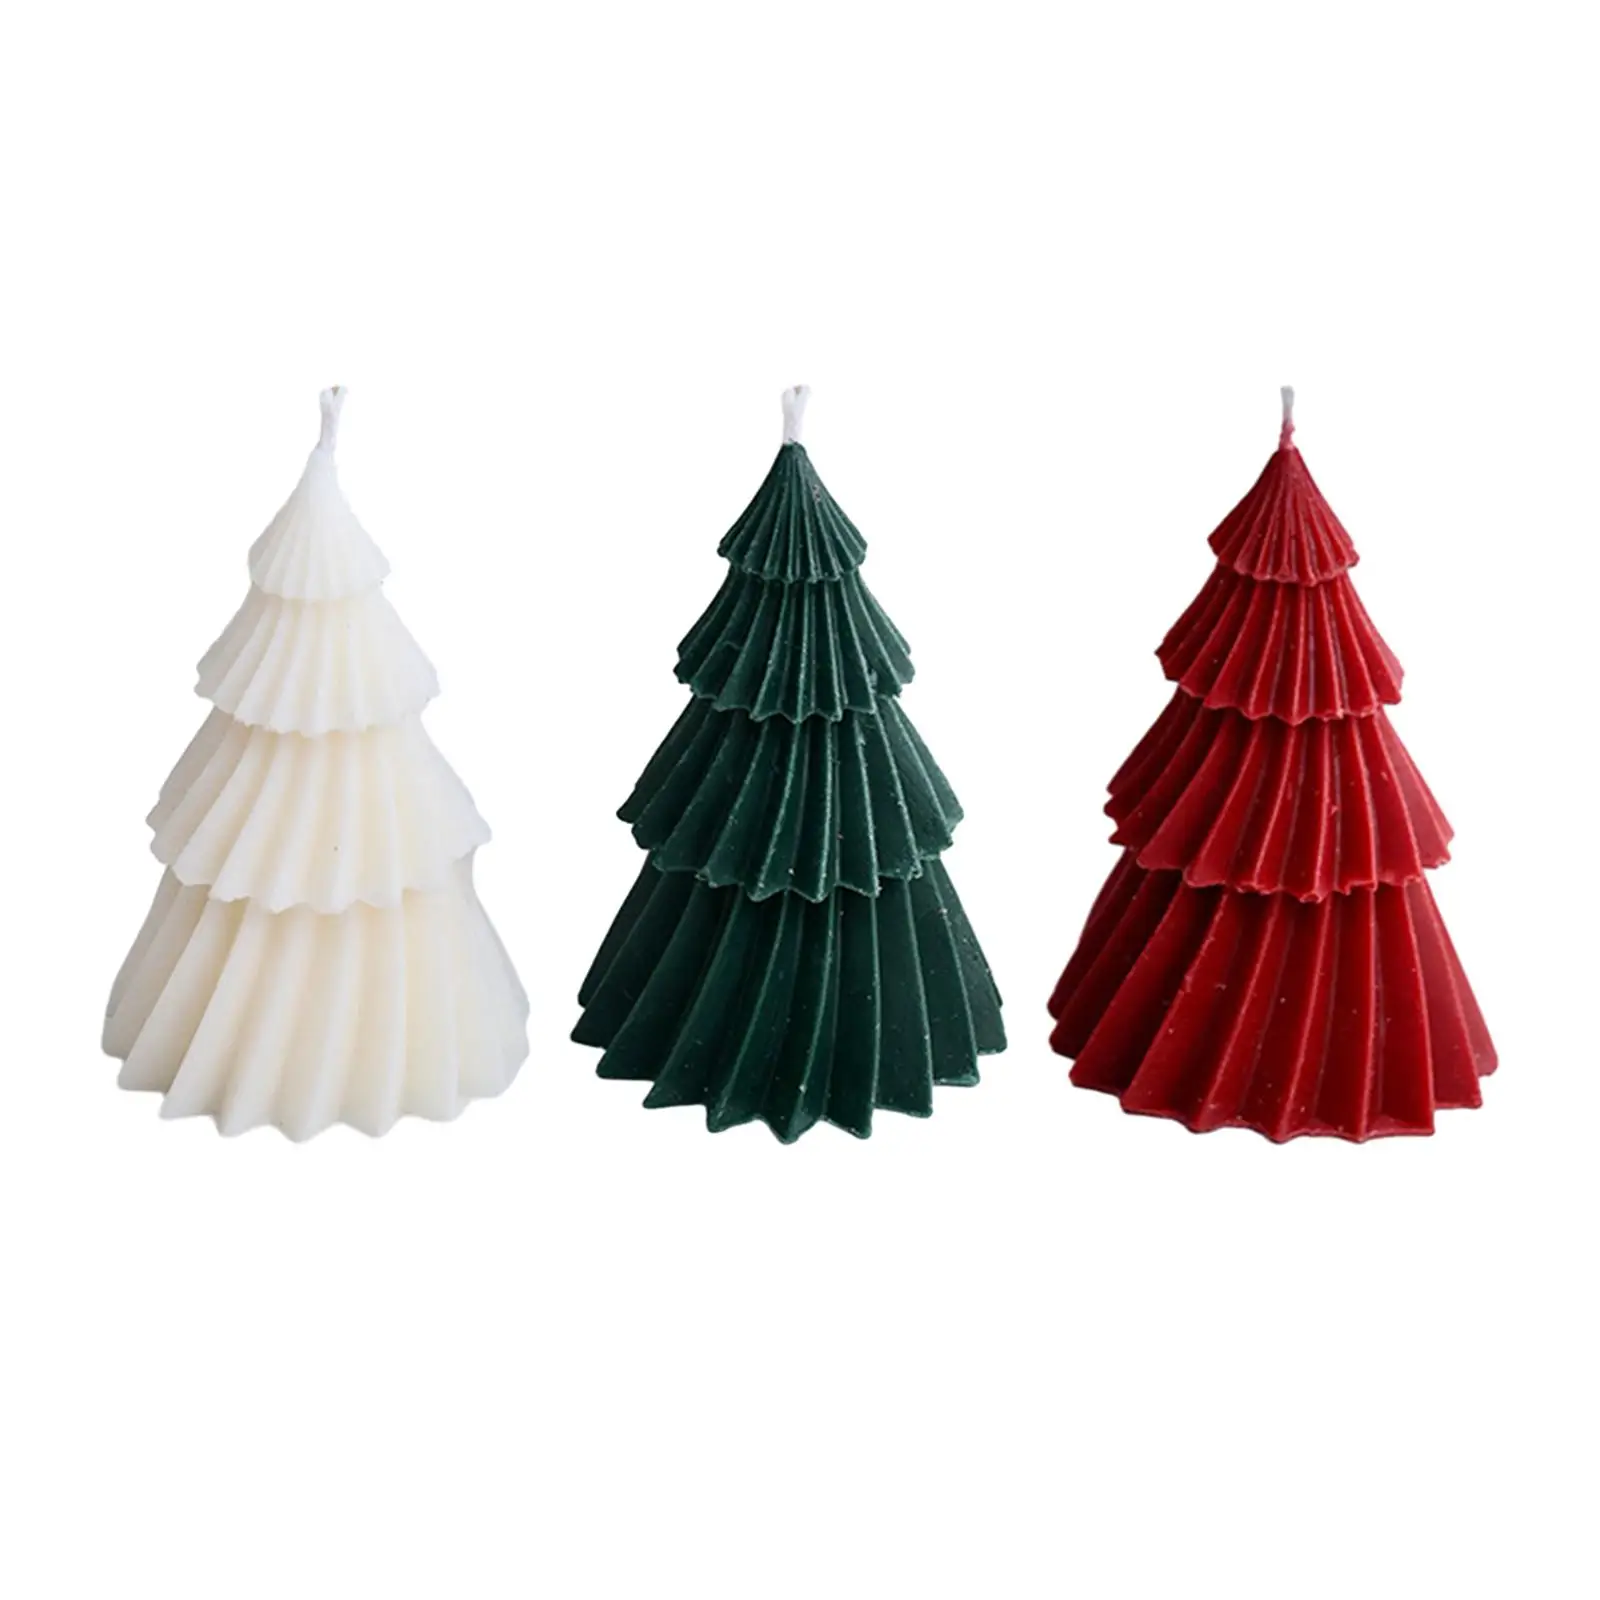 Christmas Tree Scented Candle Fragrance Props Home Decoration Accessories for Home Decor Party Indoor Party Favors